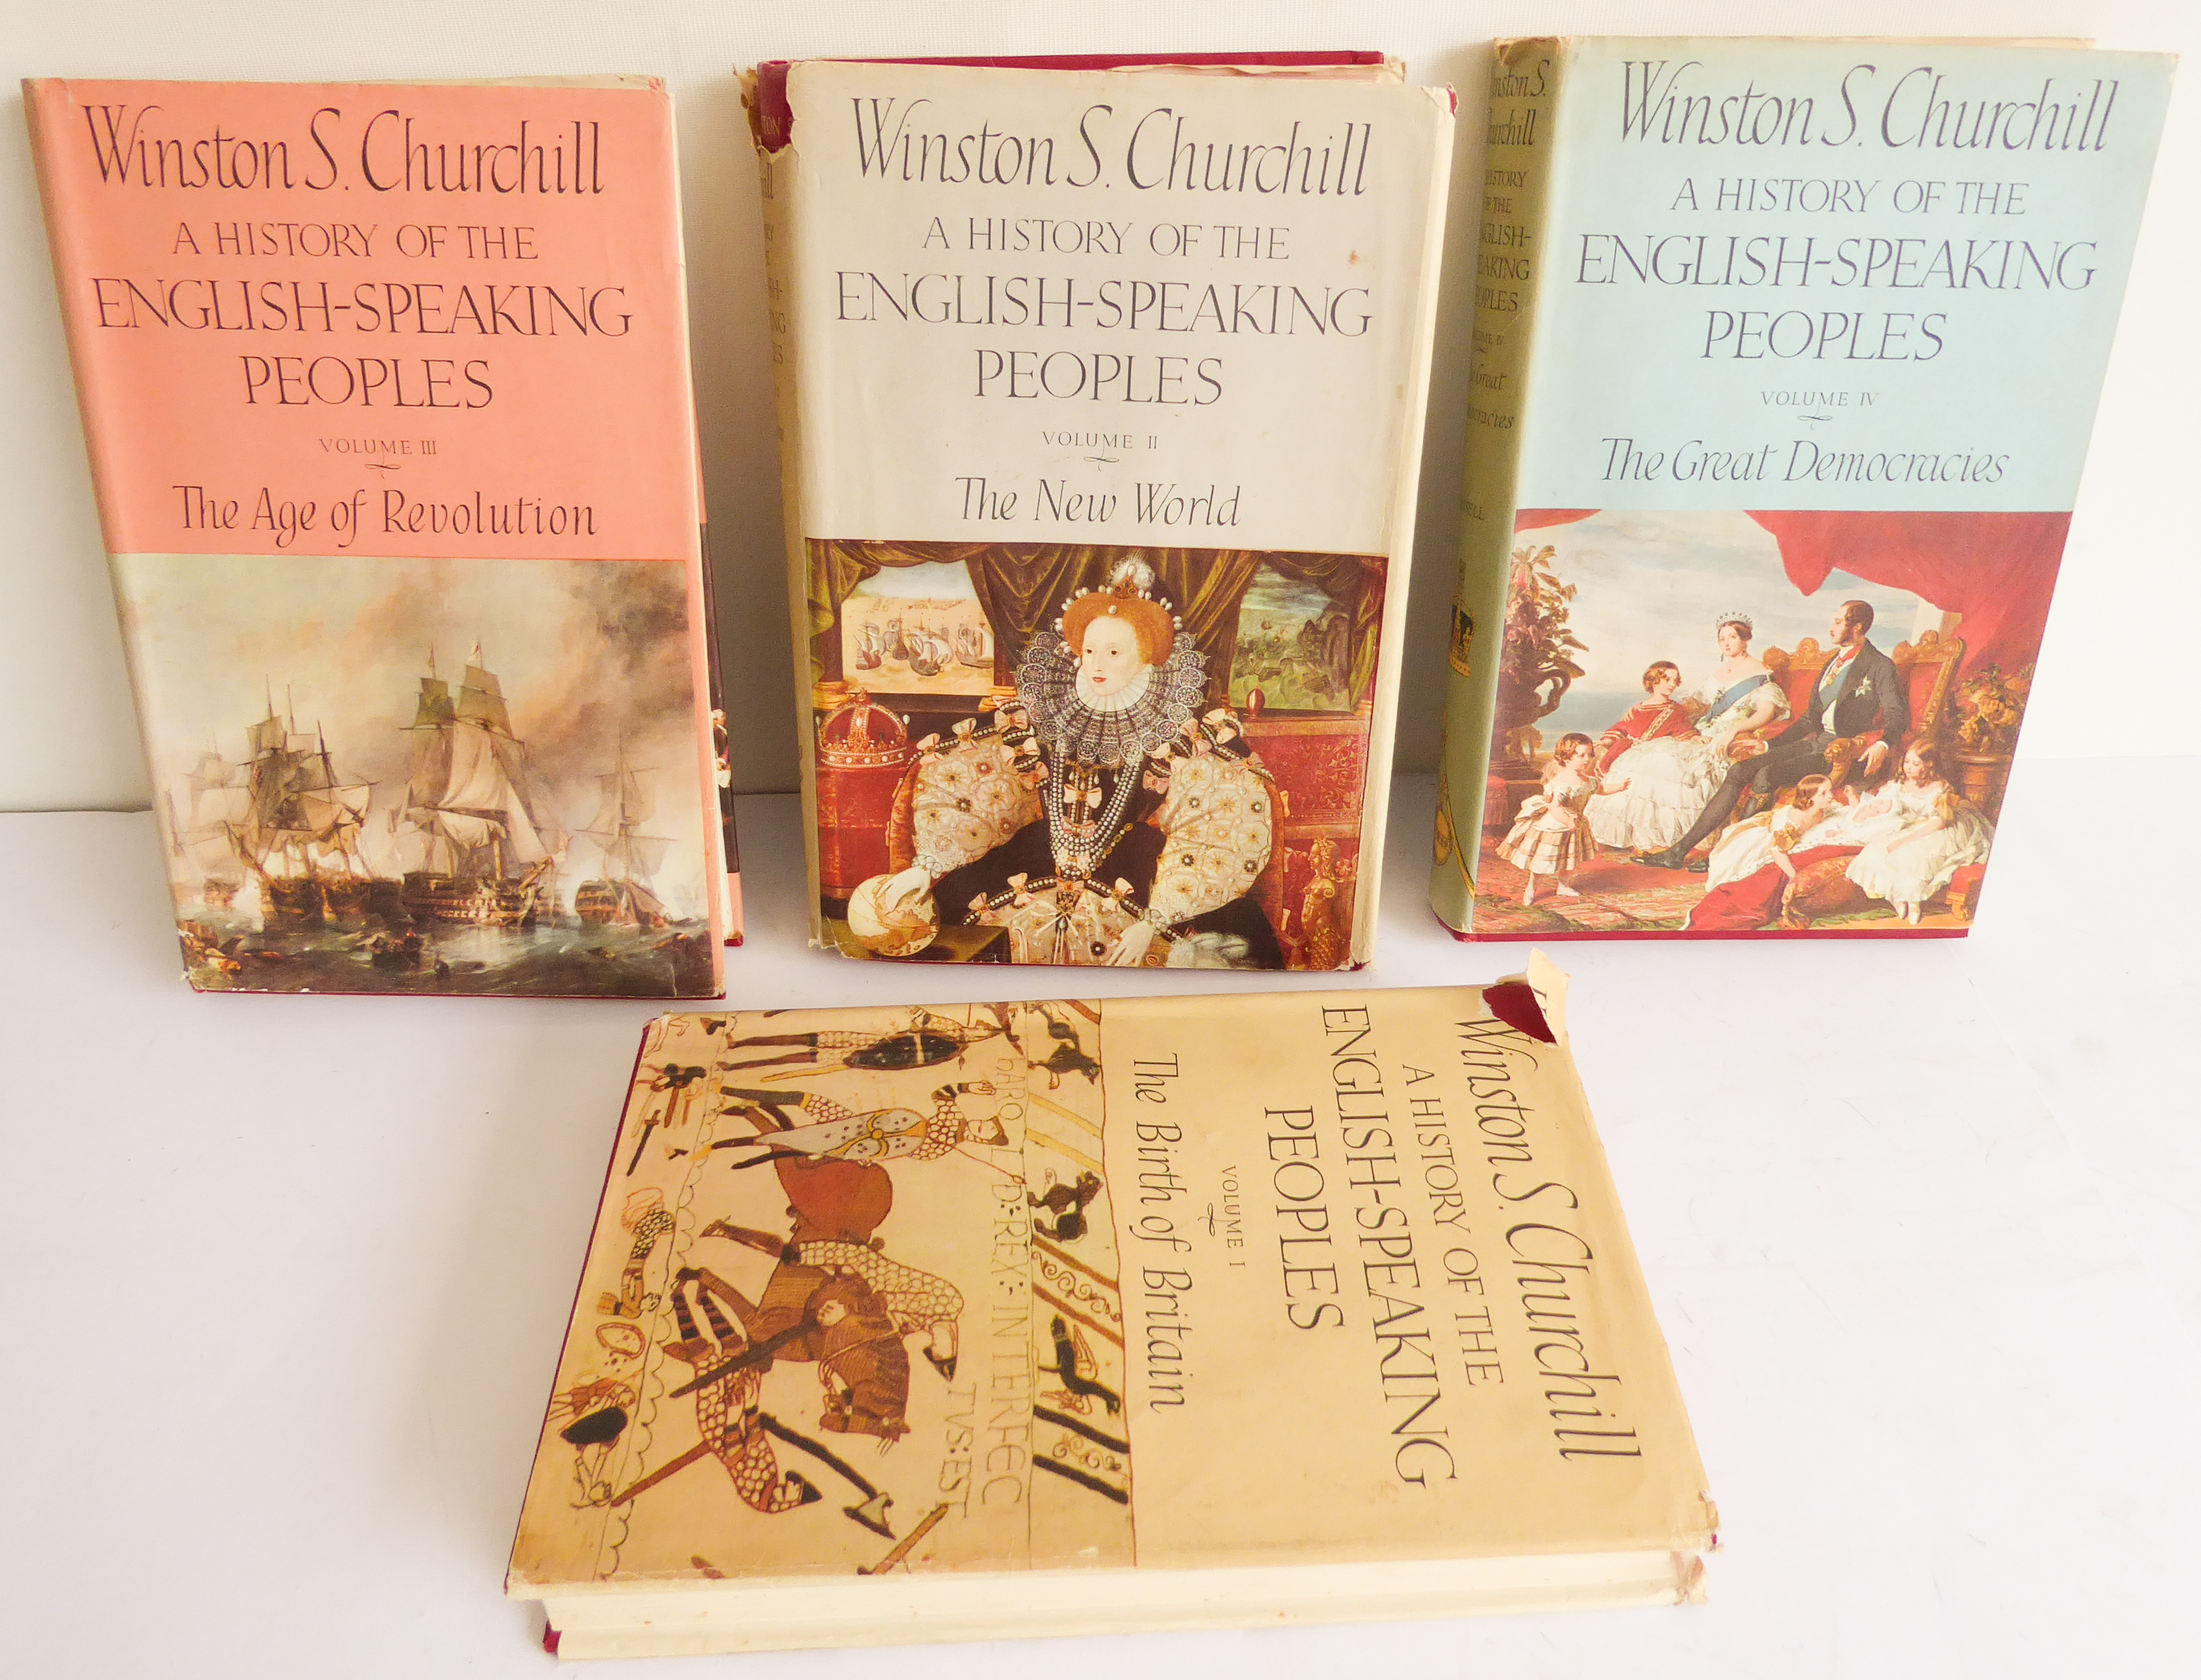 Winston S. Churchill - 'A History of the English-Speaking Peoples' (Volumes I - IV, Cassell & Co. - Image 2 of 4